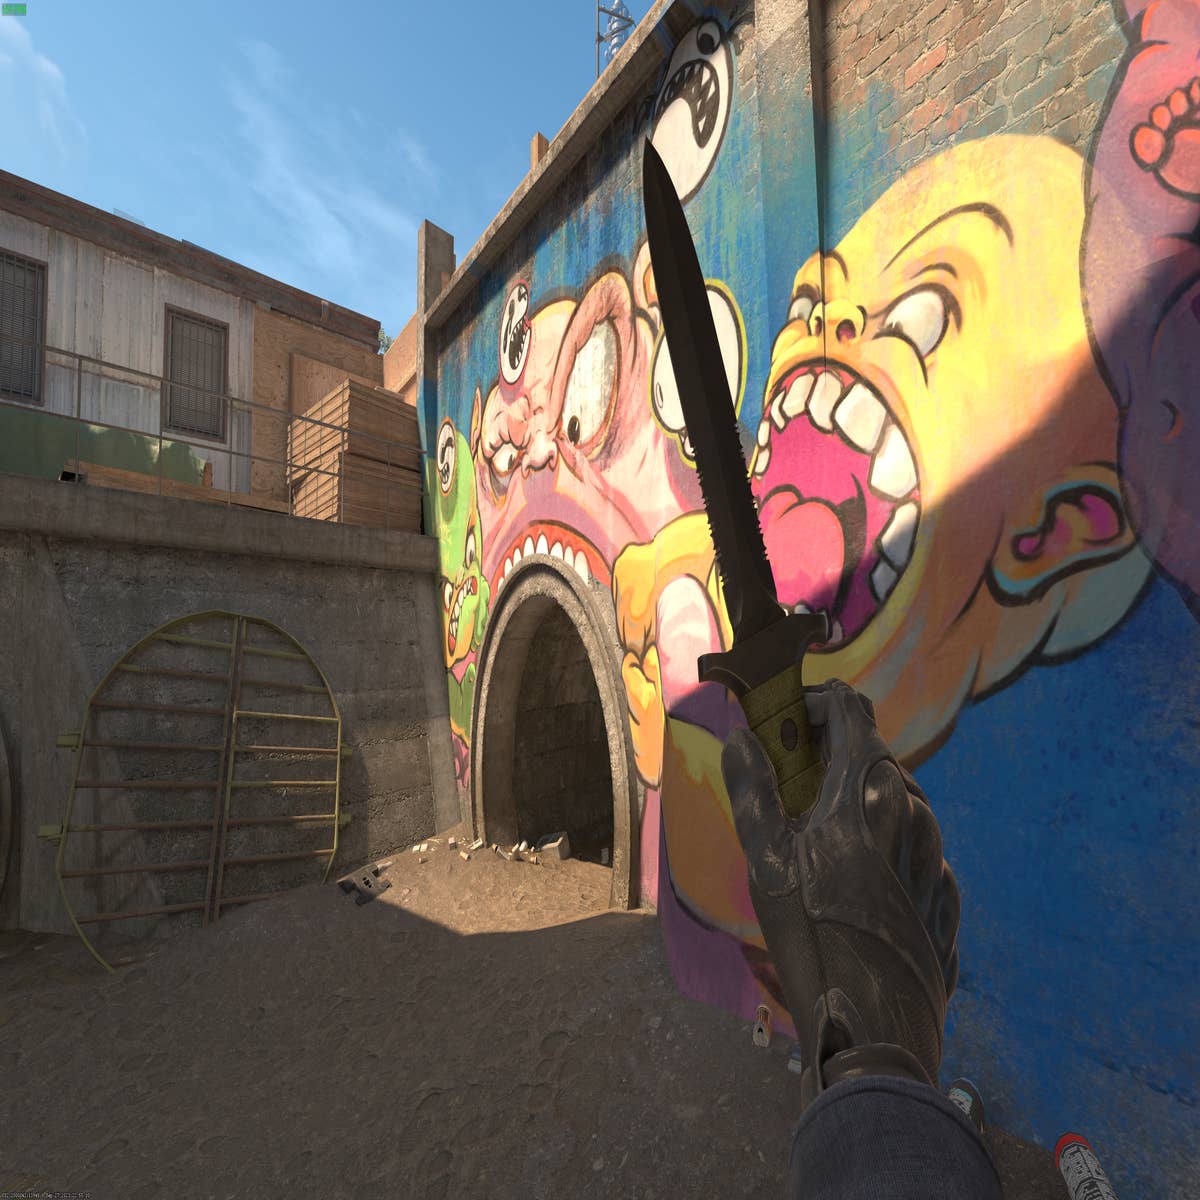 Top Strategies Every CS:GO Player Needs to Know